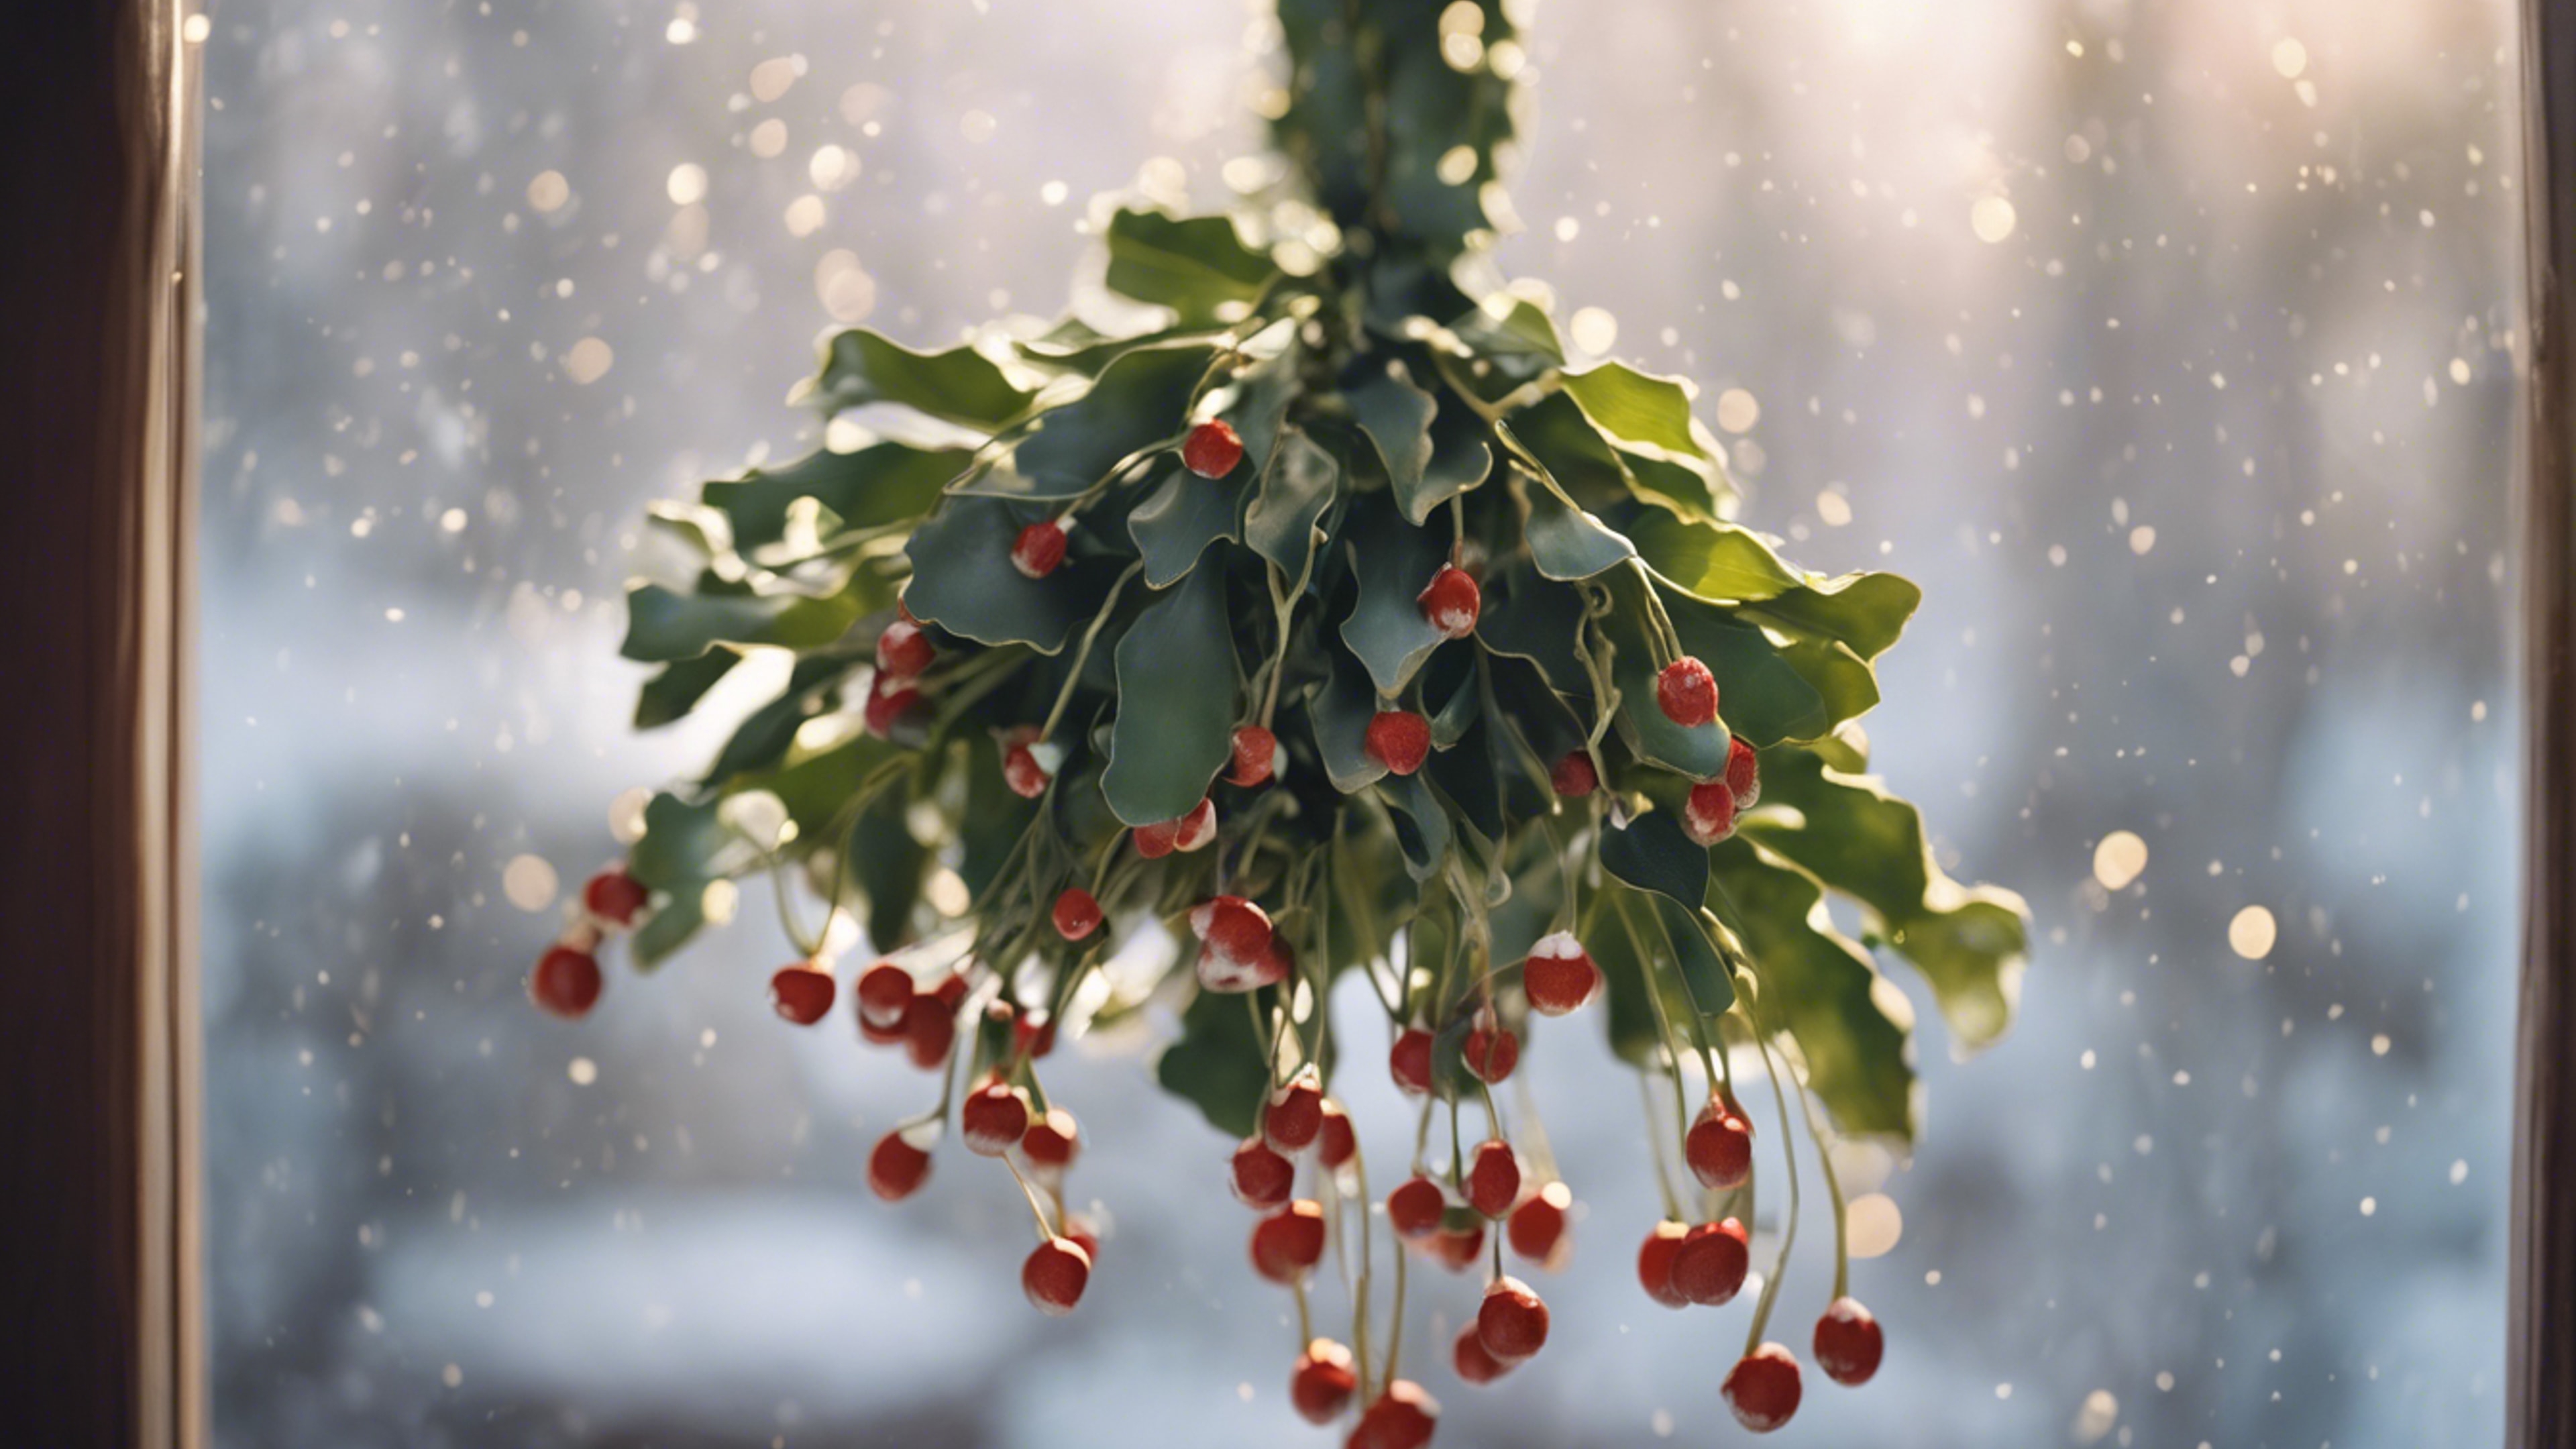 A bunch of mistletoe hanging from a door frame, welcoming family and love during winter. ورق الجدران[d07c93d49c6843628fd5]